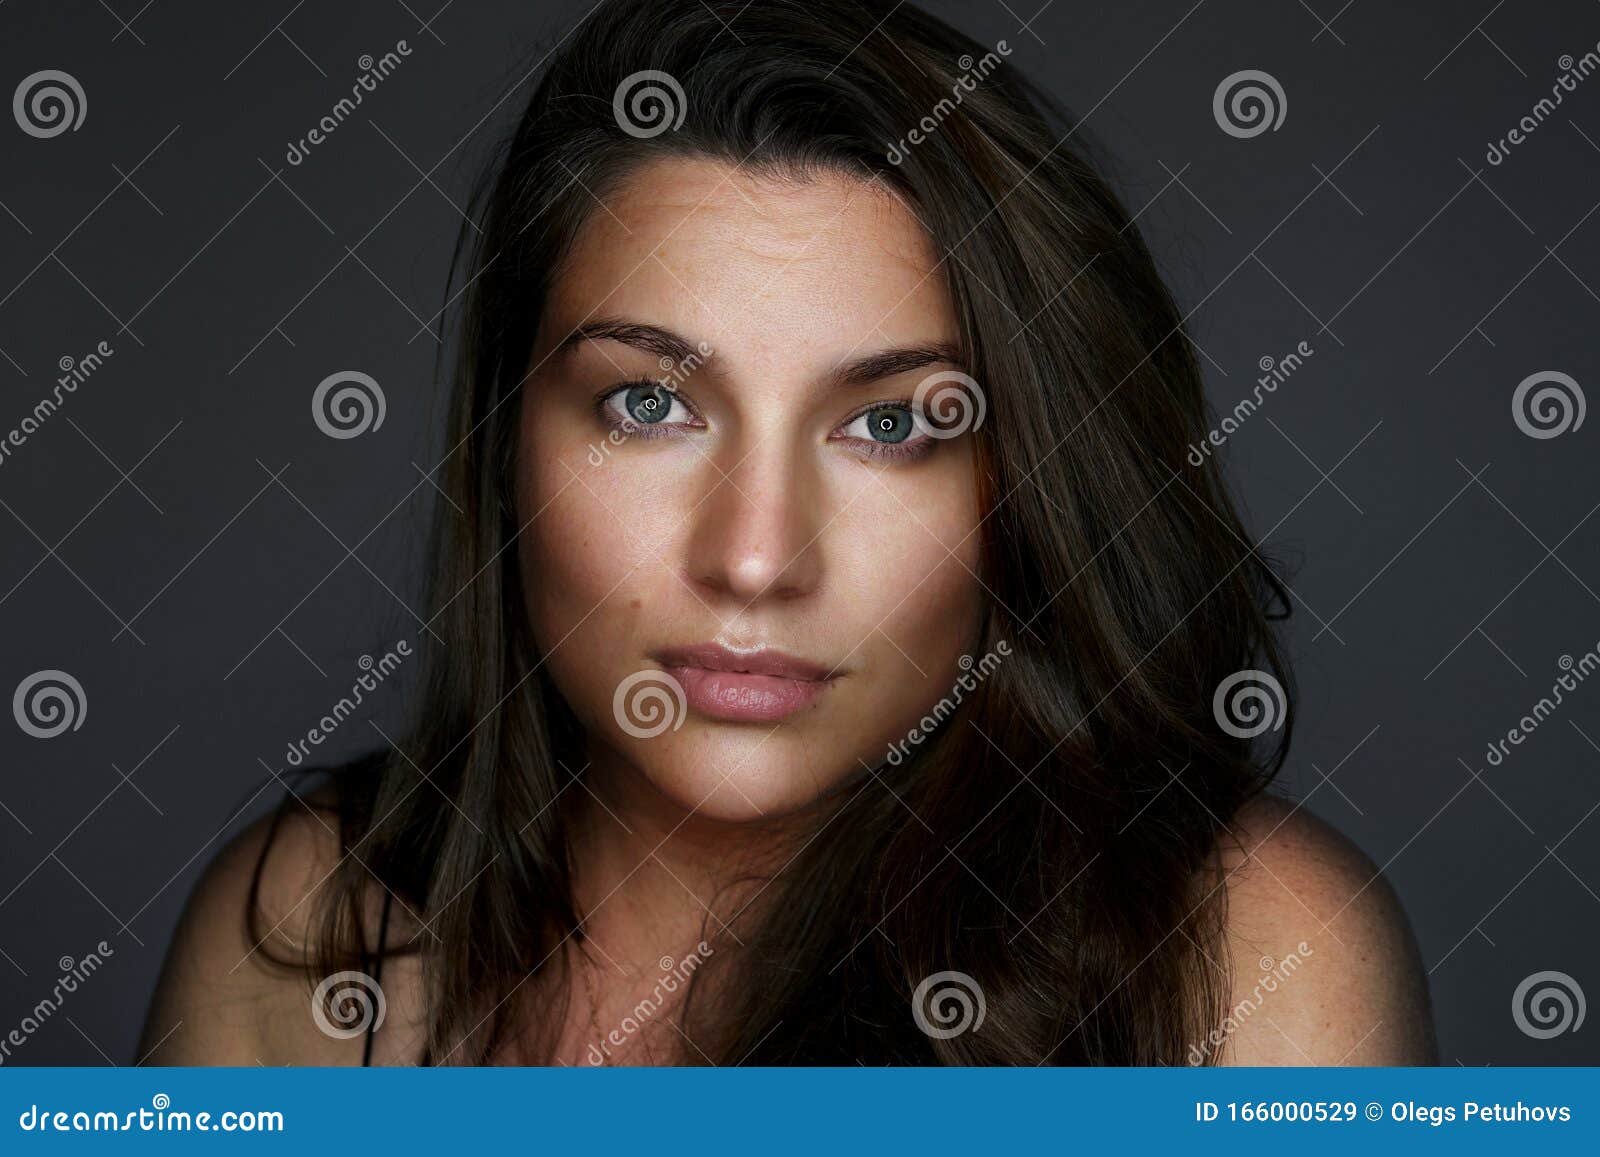 3. "Sultry woman with dark hair and blue eyes" - wide 4